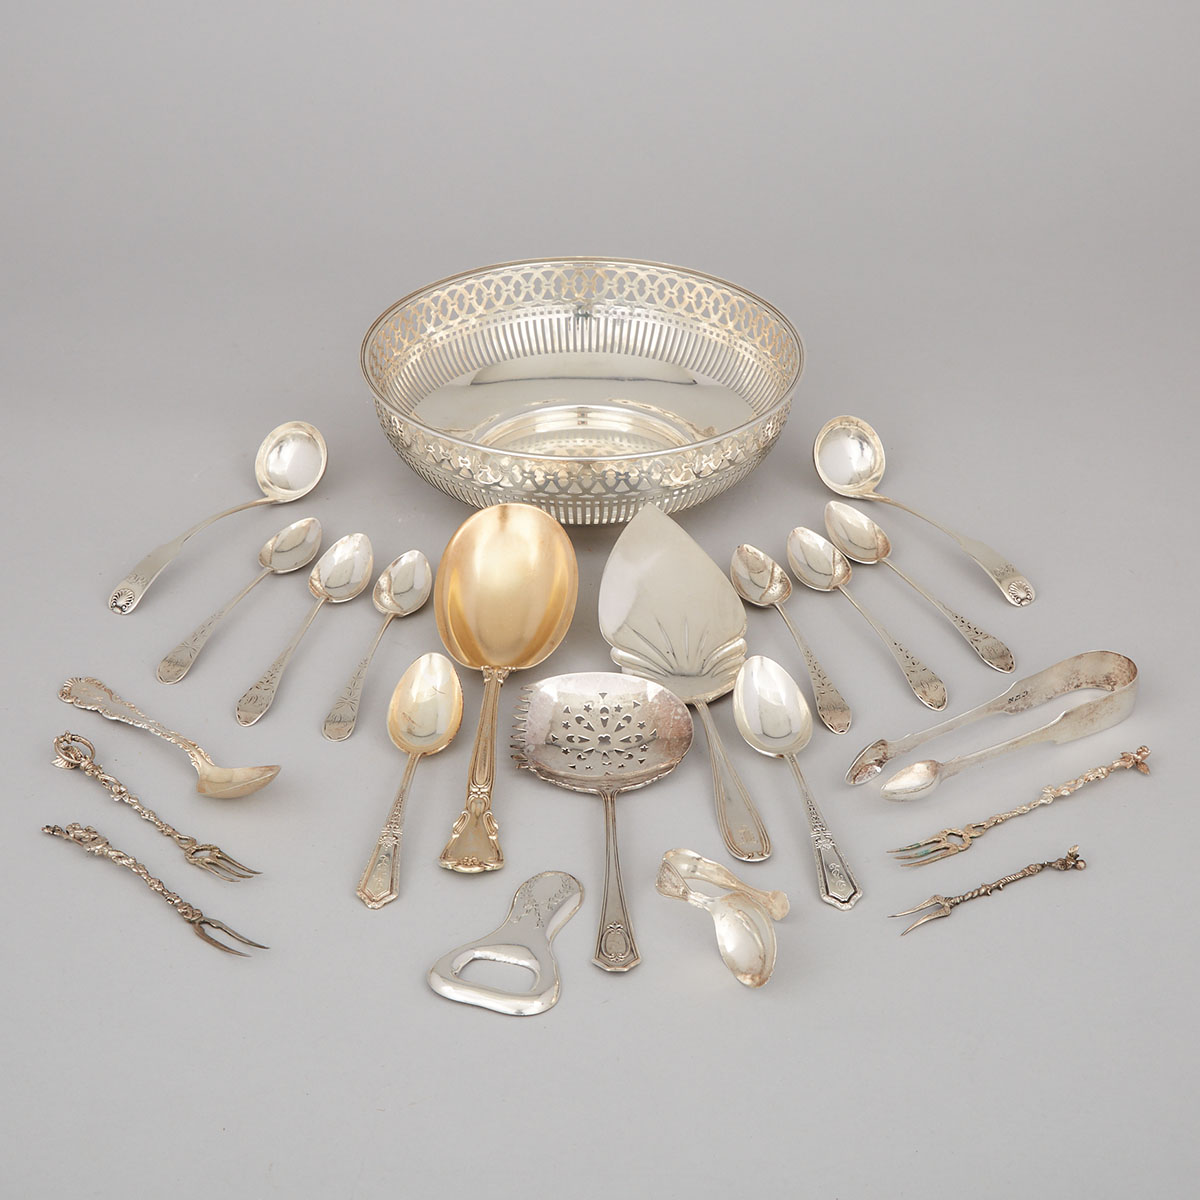 Twenty-One Pieces of American, Canadian, Scottish and Continental Silver Flatware and a Pierced Bowl, 19th-20th century